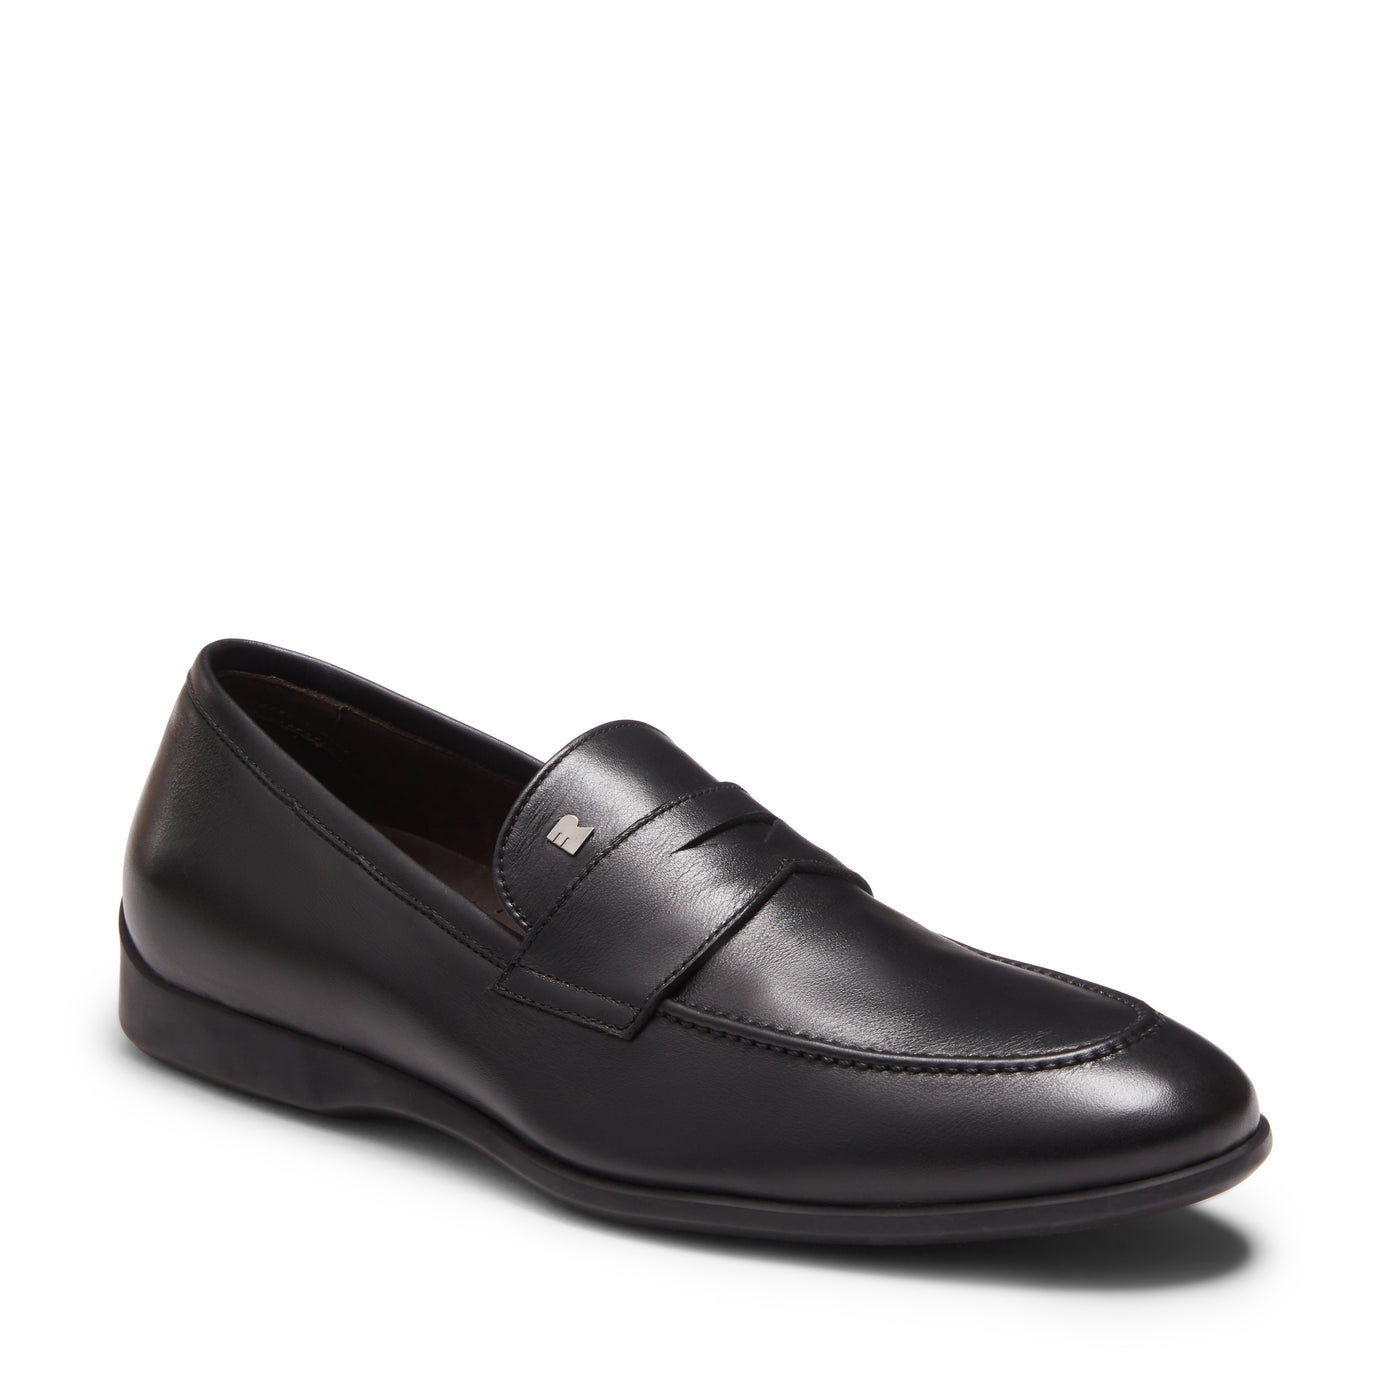 Shop The Latest Collection Of Fratelli Rossetti Fr M Nashville Loafer-46745 In Lebanon